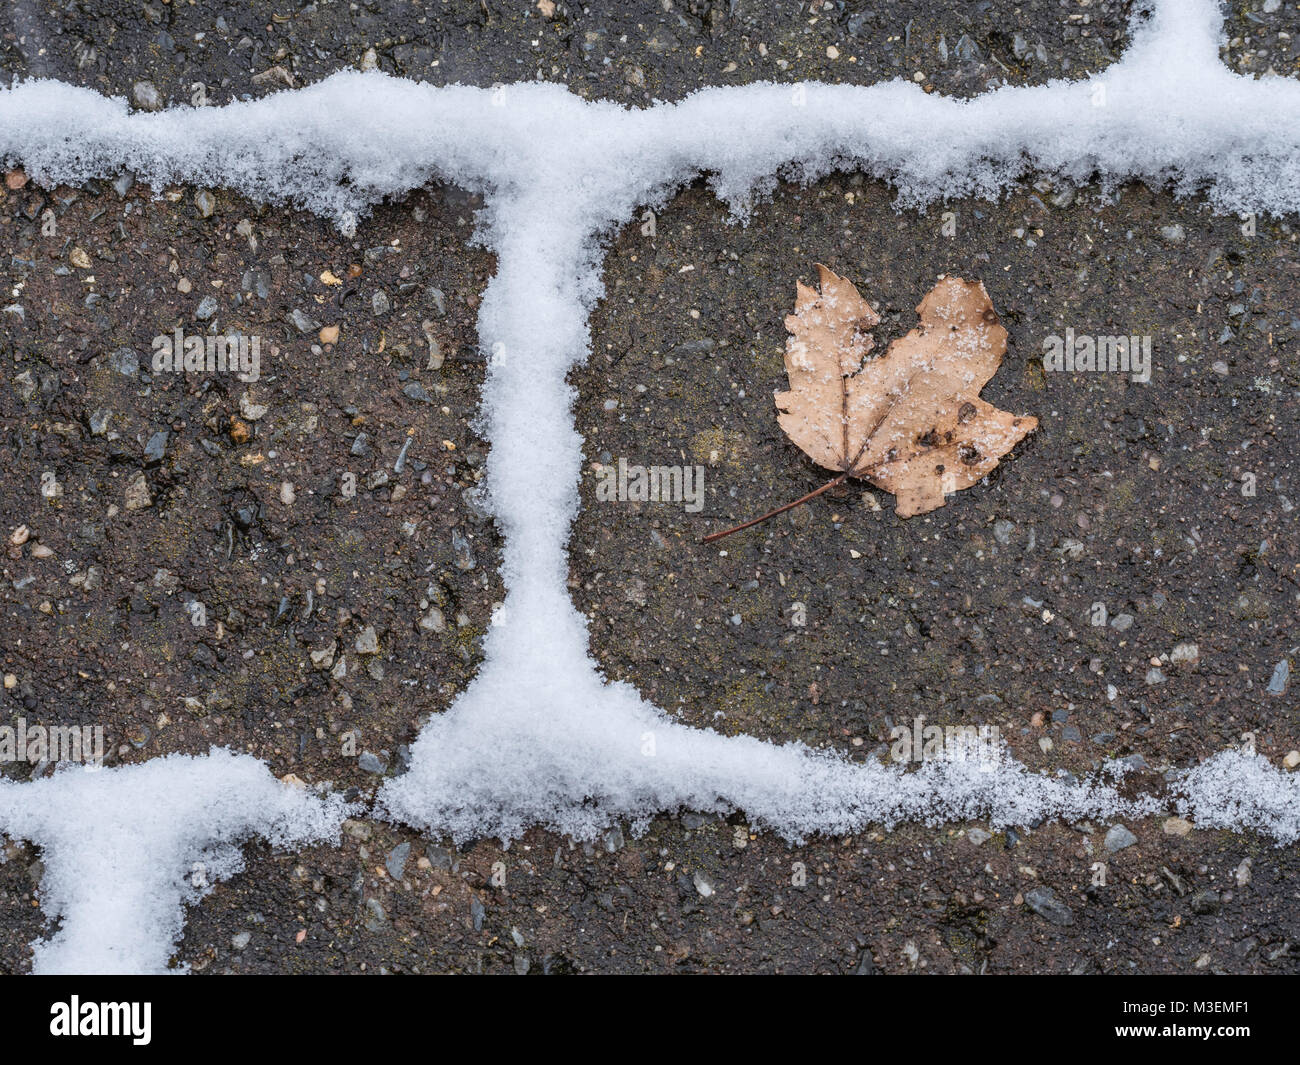 dry leaf laying on paving bricks with snow accumulated in the space between the bricks Stock Photo